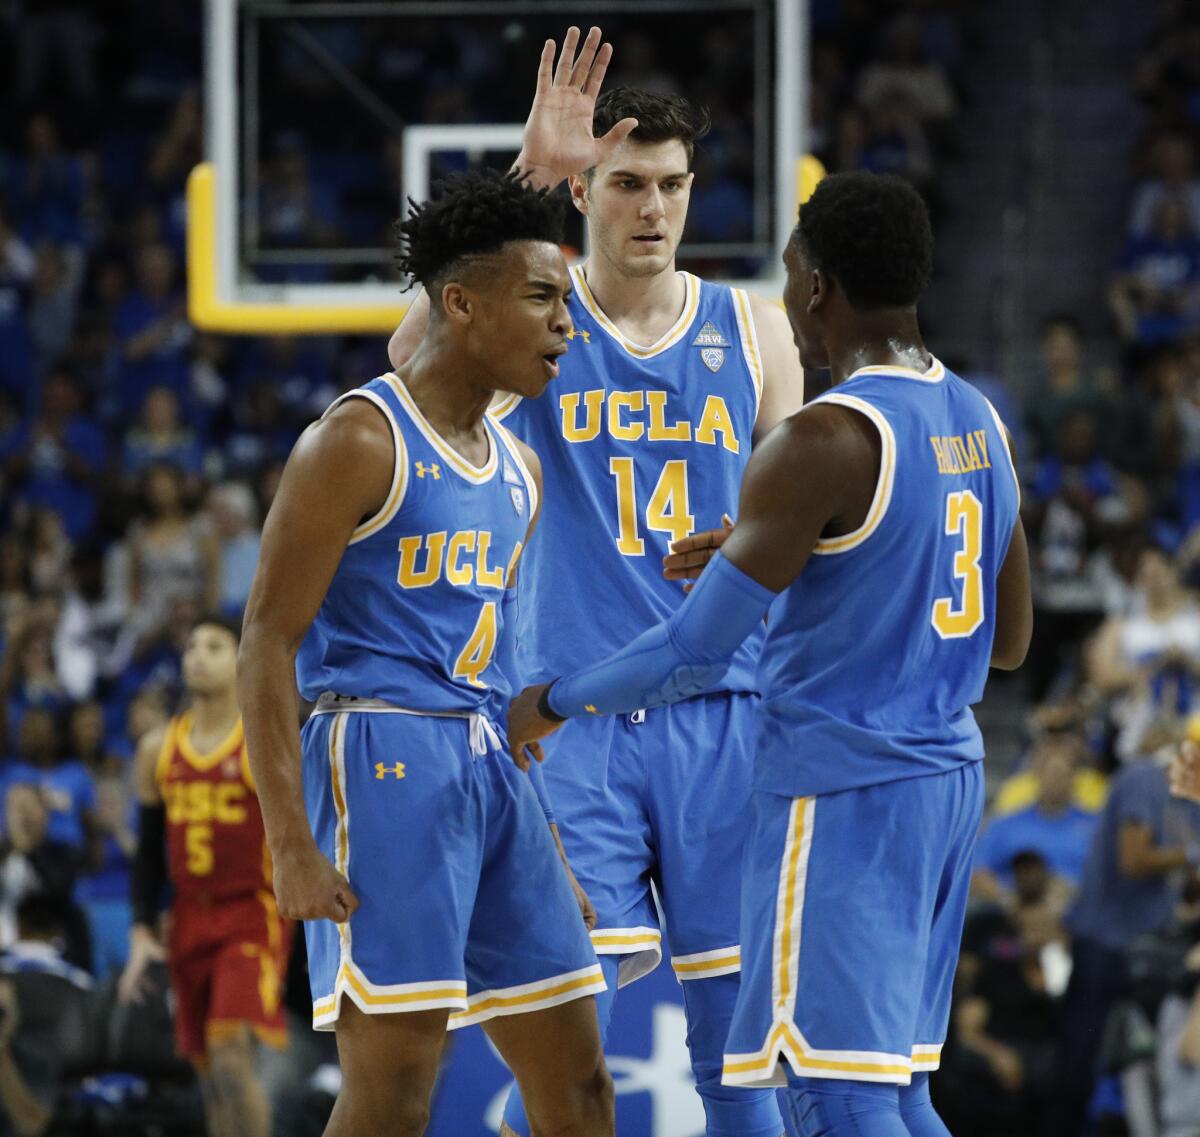 UCLA guard Aaron Holiday (3) is congratulated by guard Jaylen Hands (4) and forward Gyorgy Goloman (14) after sinking a three-point shot late in the game against USC at Pauley Pavilion on Feb. 3.